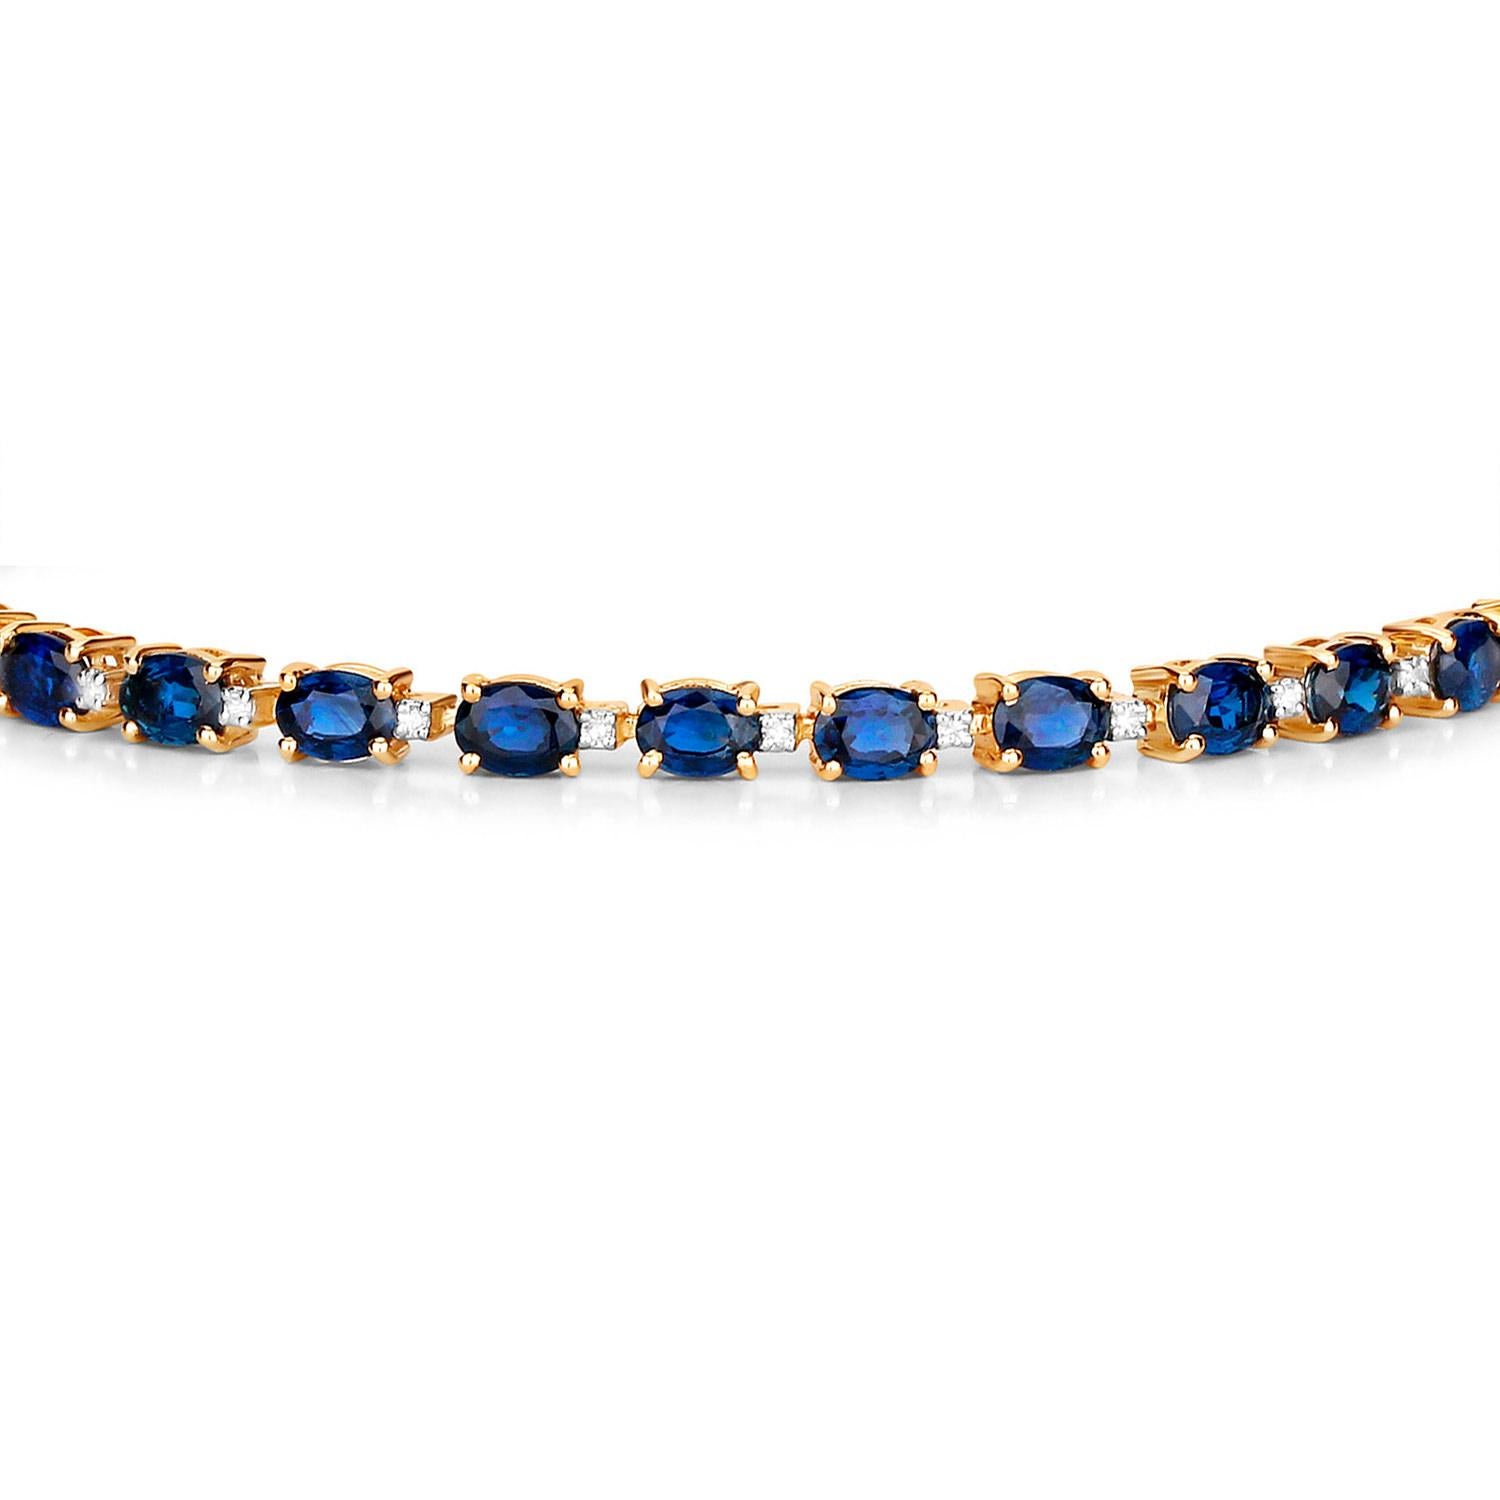 Contemporary Blue Oval Cut Sapphires Bracelet Diamond Links 6.3 Carats 10K Yellow Gold For Sale